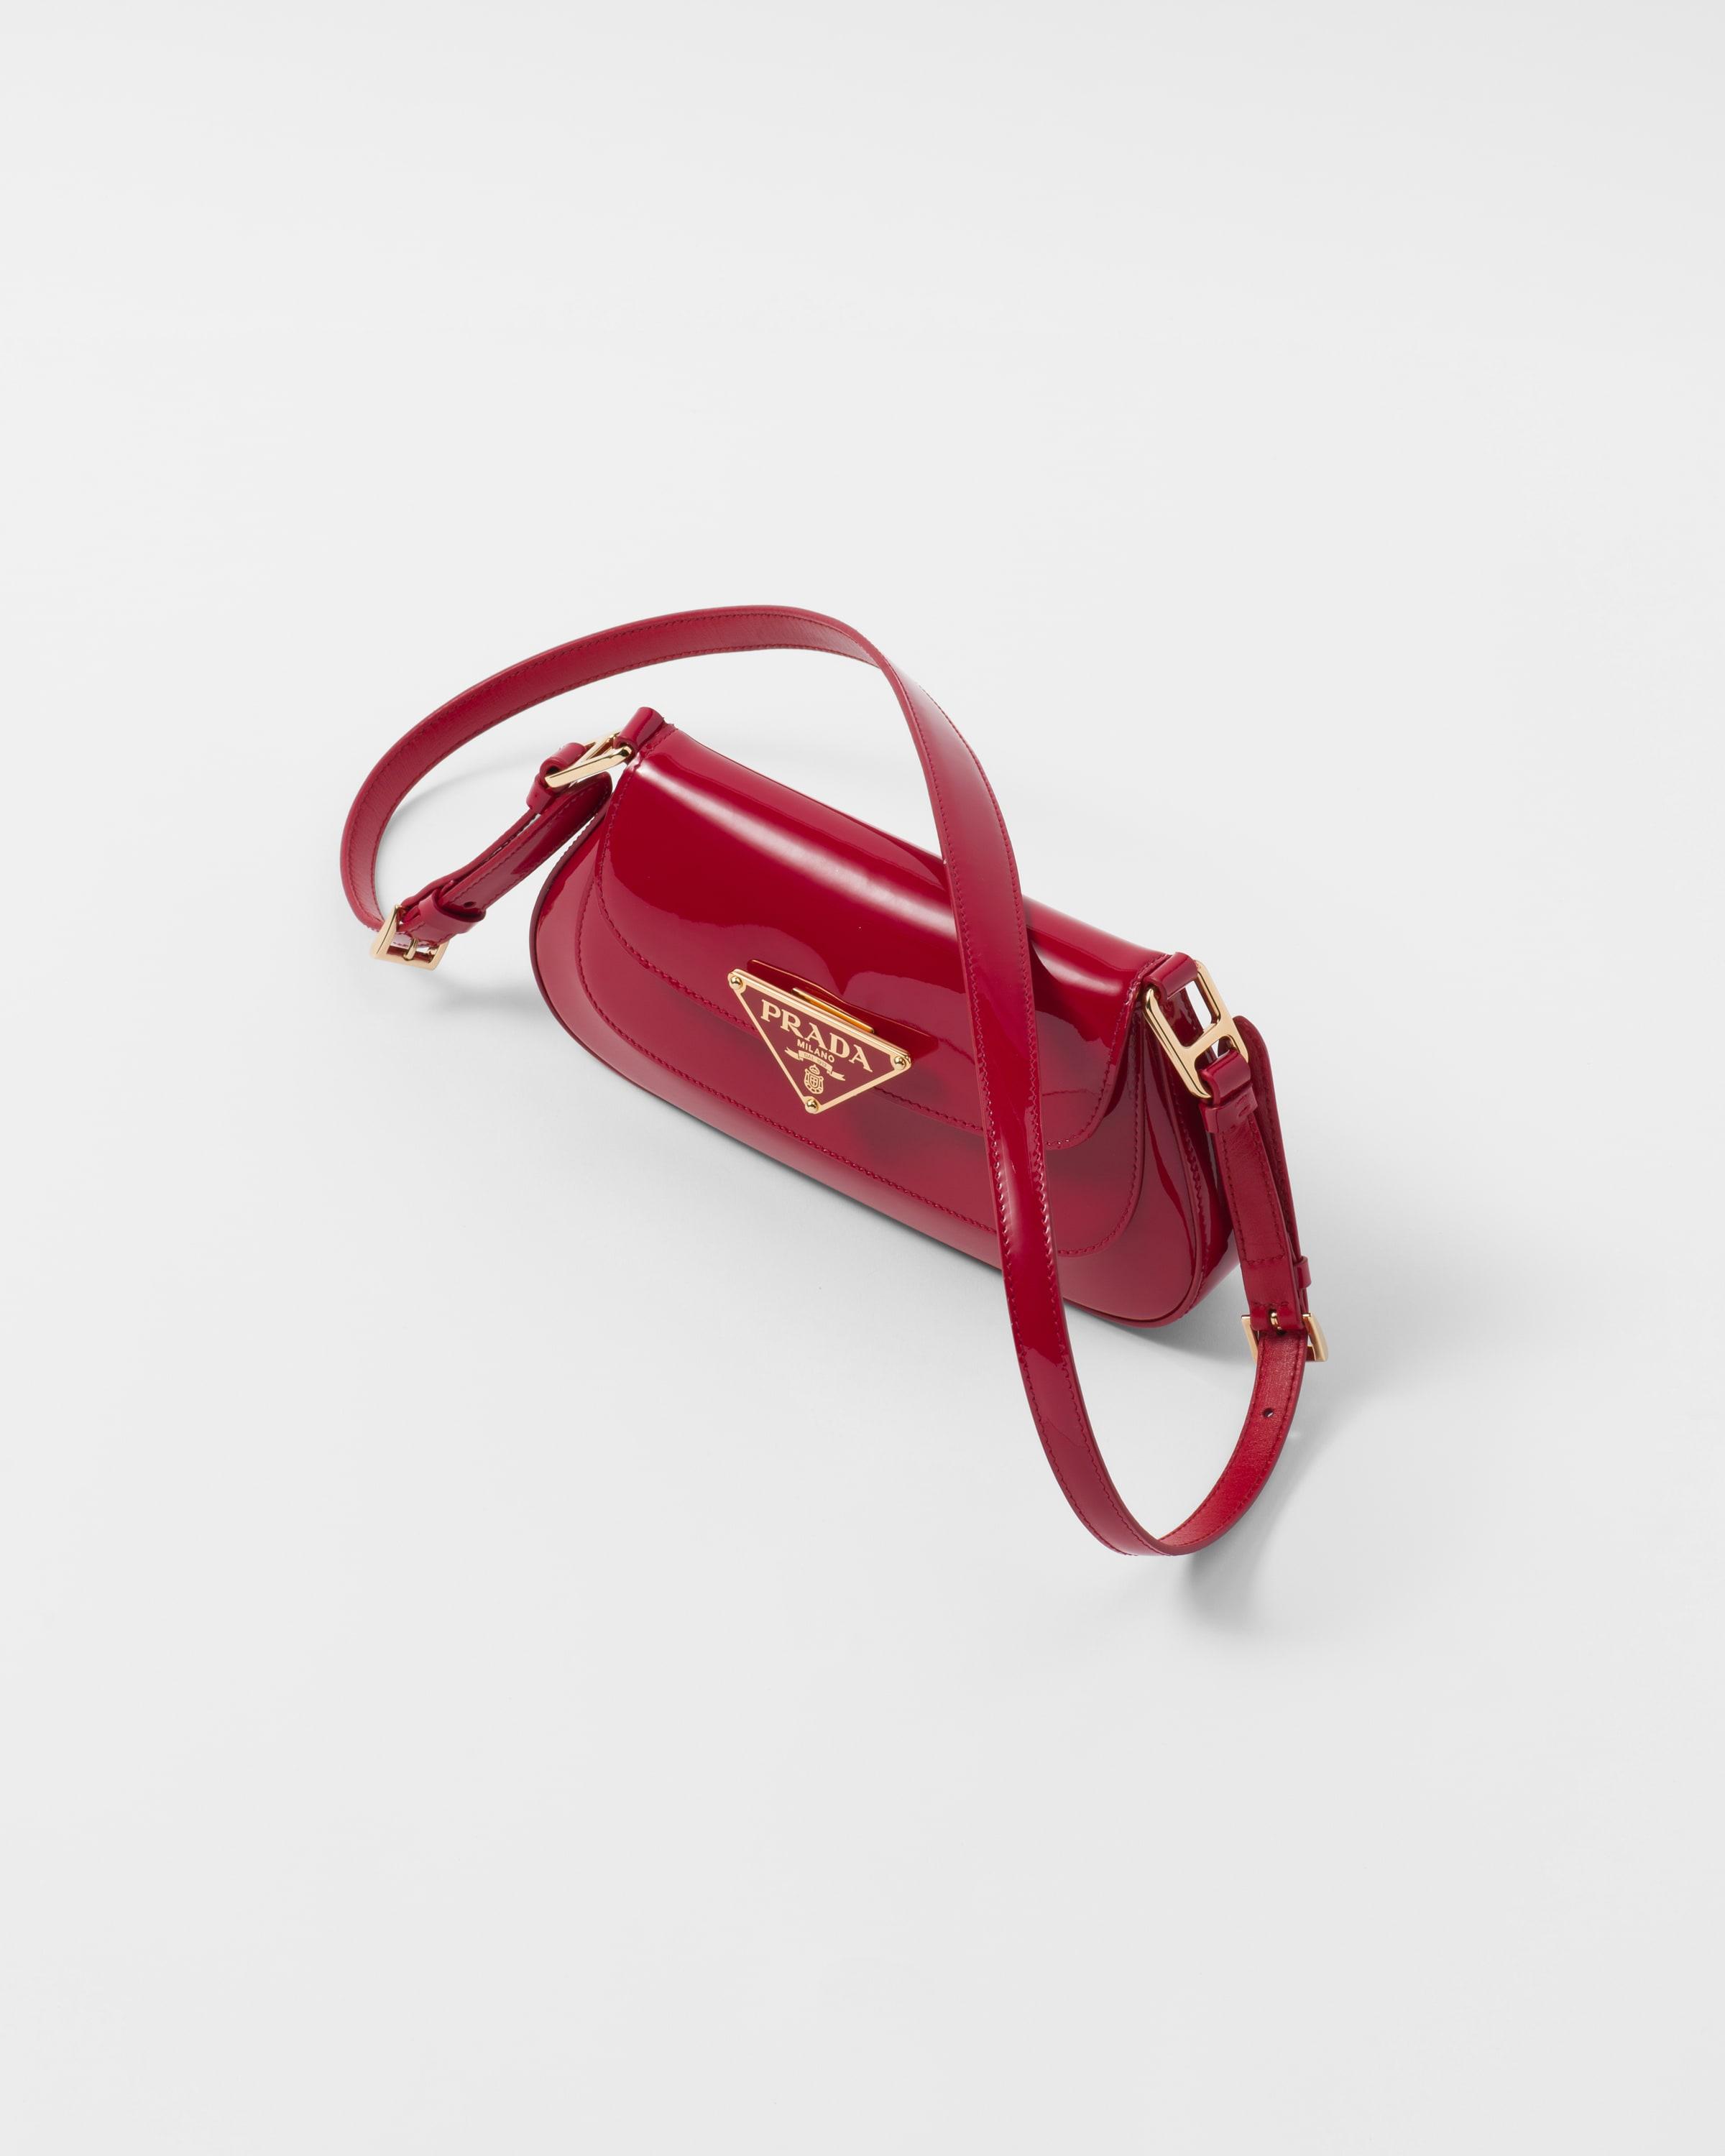 Prada Patent Leather Shoulder Bag in Red | Lyst